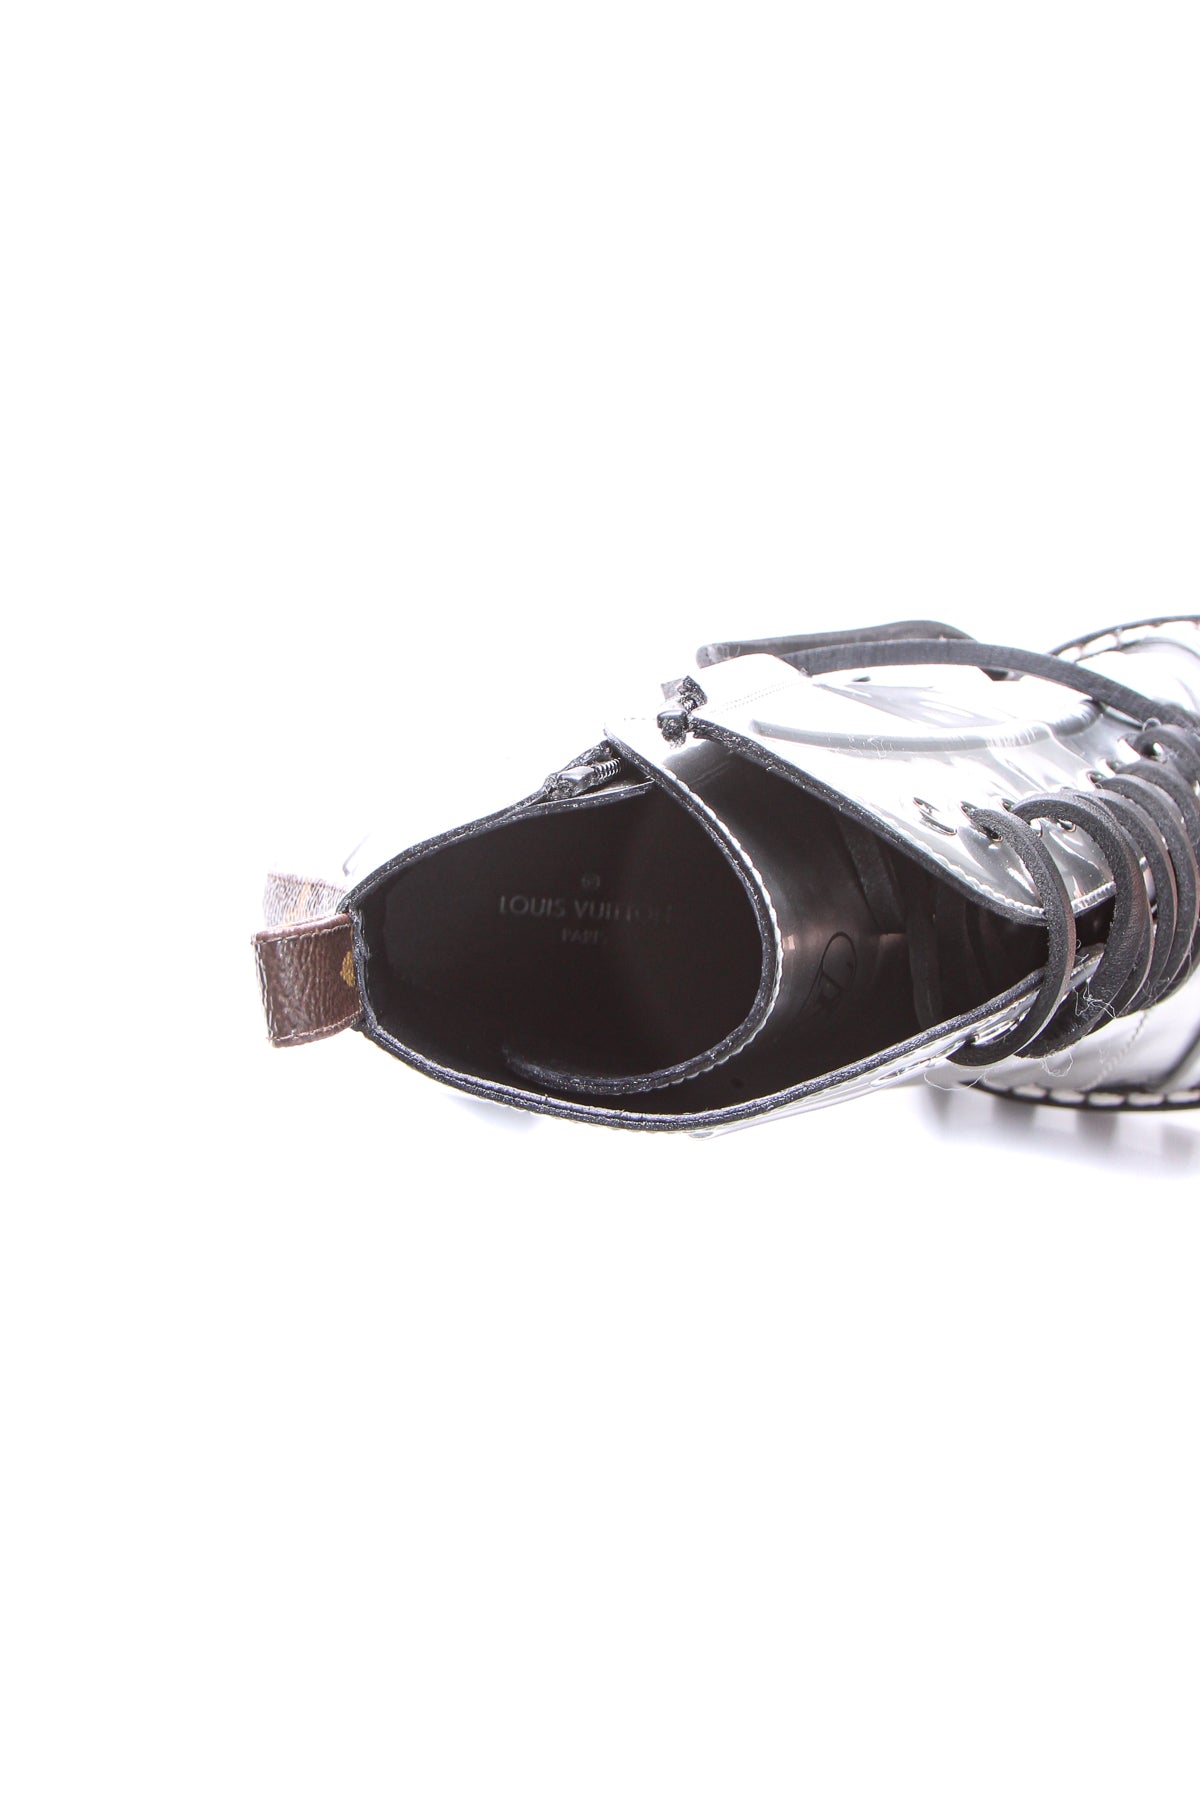 Louis Vuitton Silver Patent Calfskin Leather Low Top Spaceship